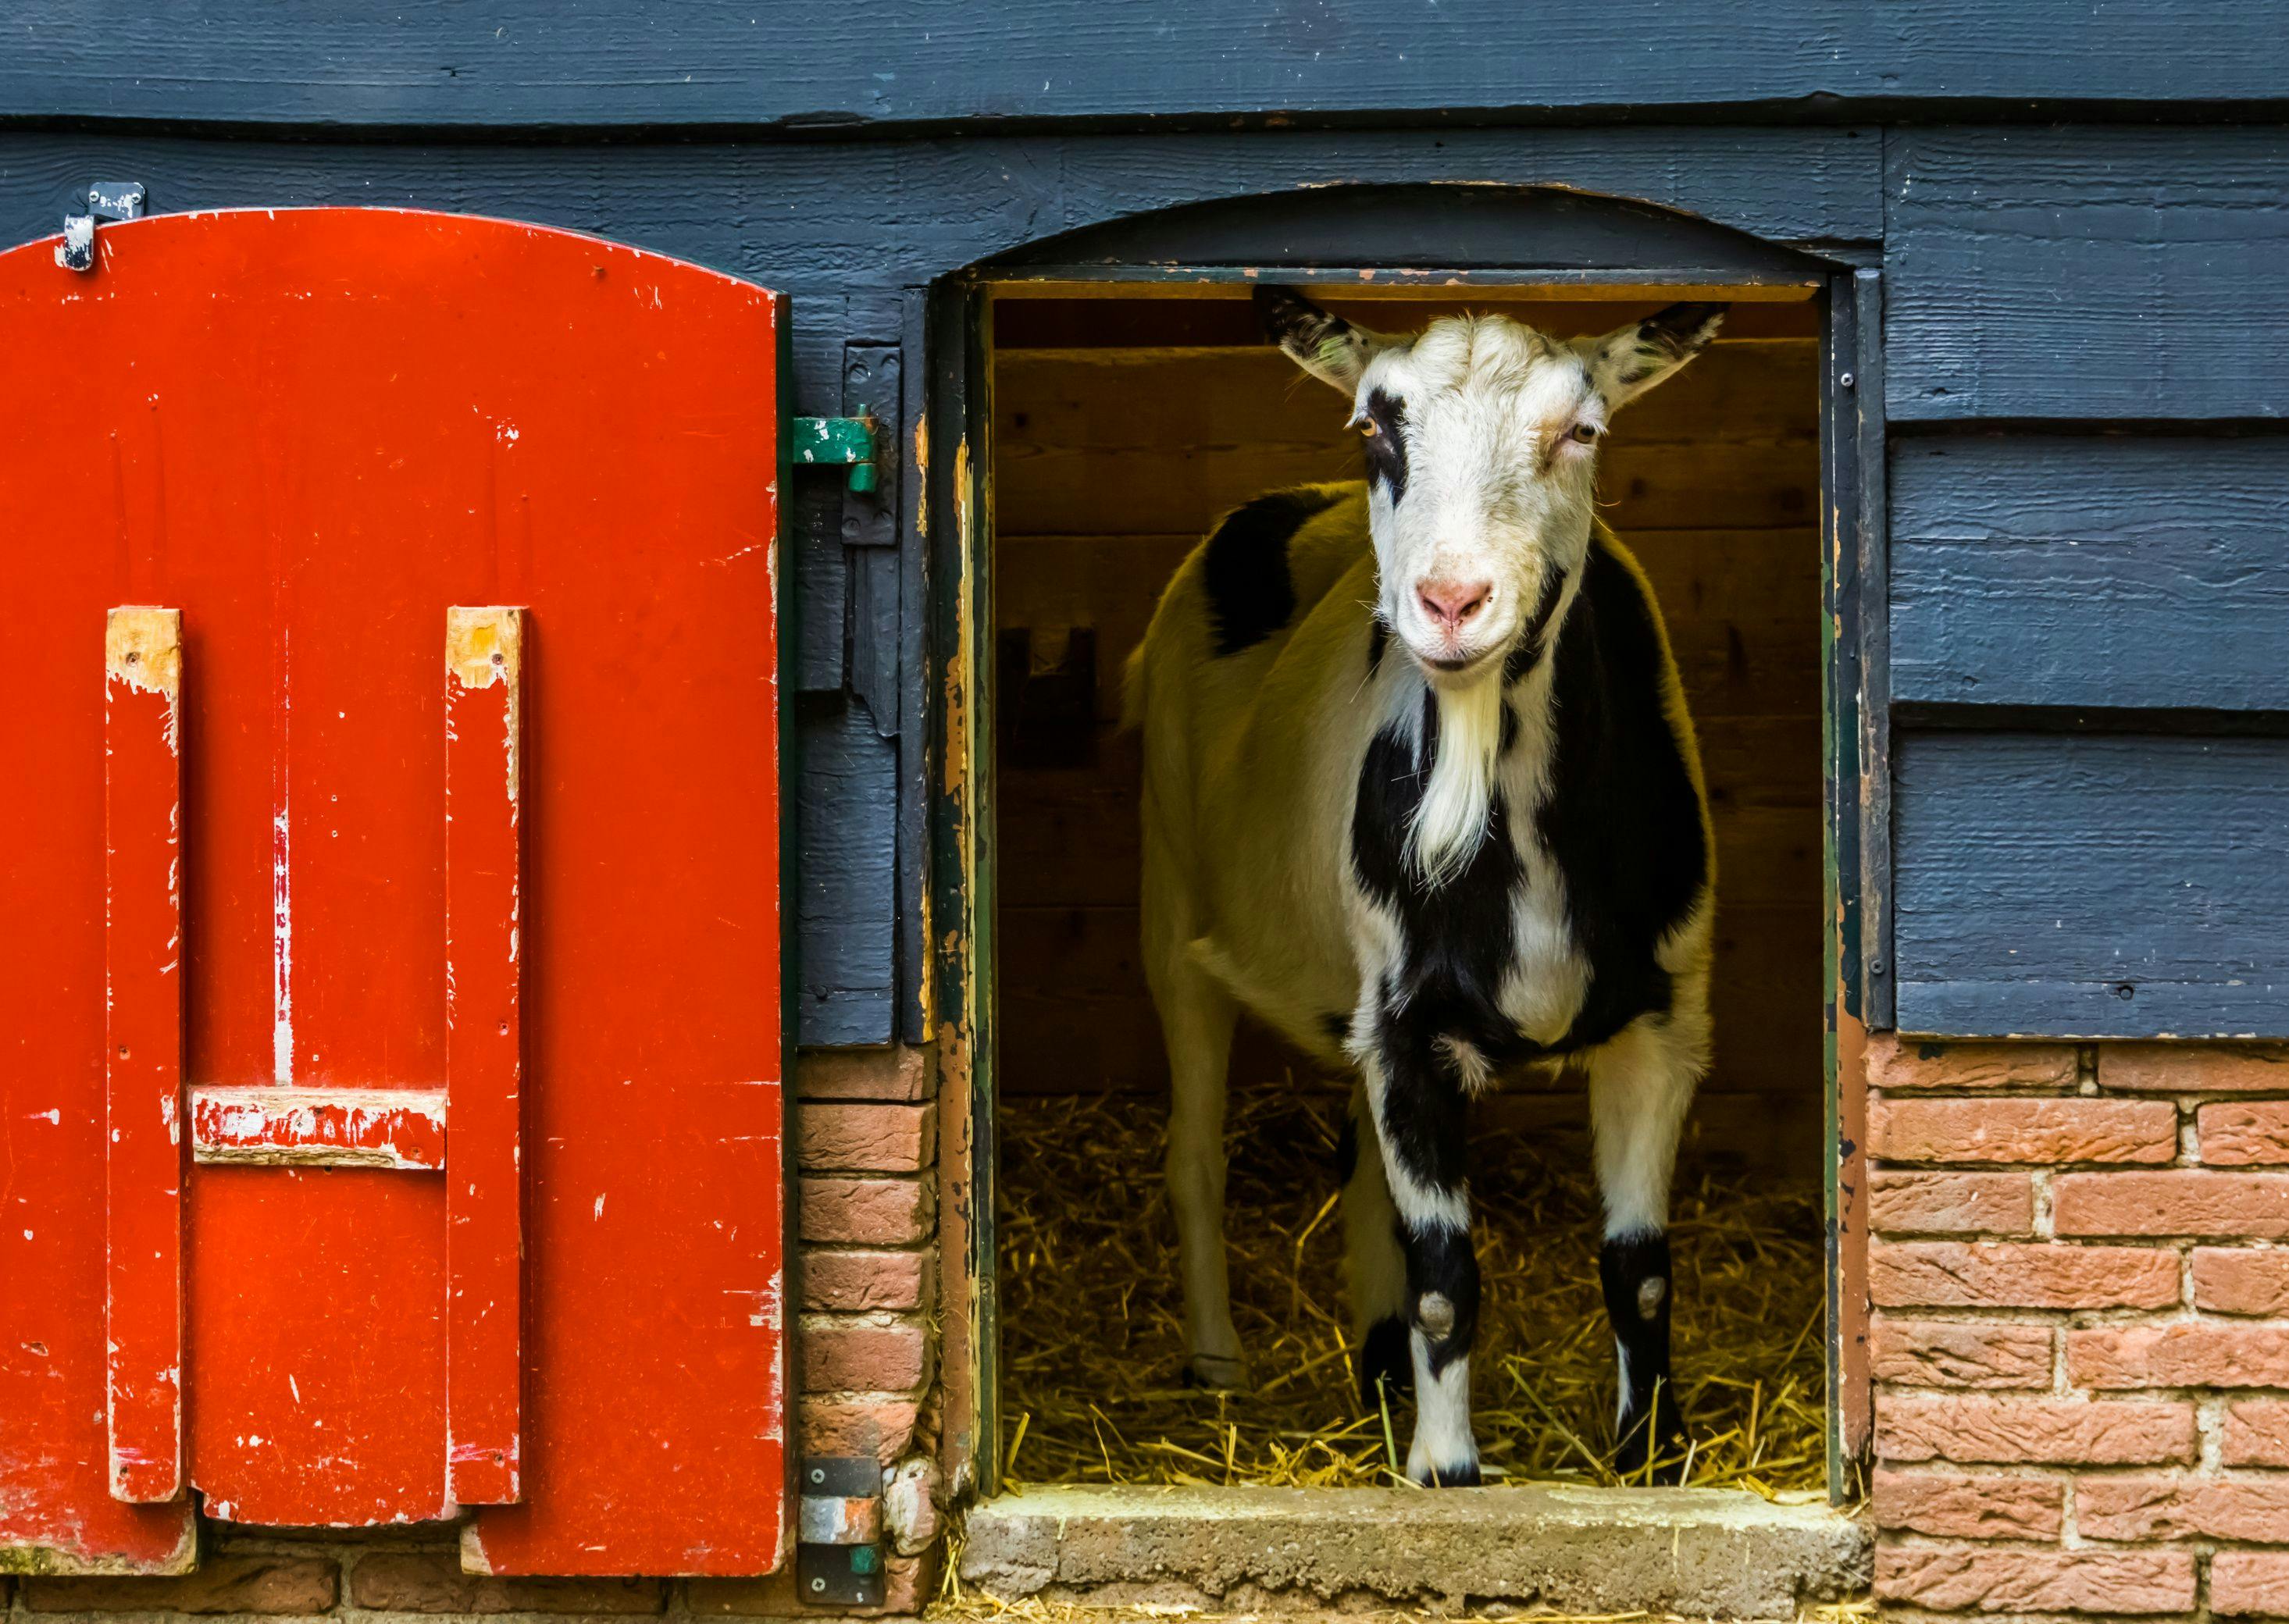 Special delivery: What to do when a pregnant goat shows up at your door